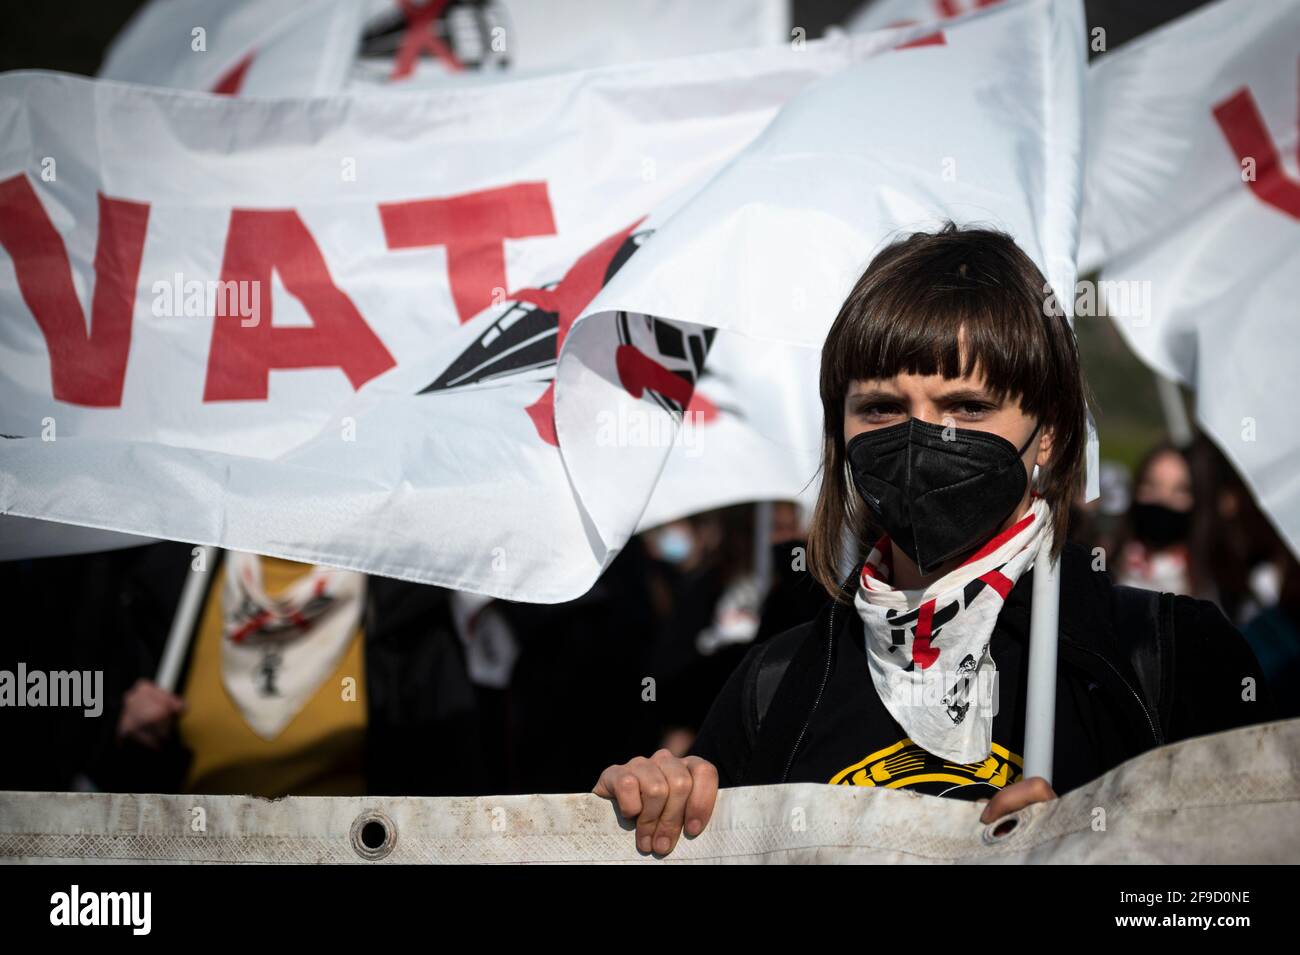 San Didero, Italy. 17 April 2021. A demonstrator looks on during a 'No TAV' (No to high-speed train) demonstration against Lyon-Turin high speed rail link. Credit: Nicolò Campo/Alamy Live News Stock Photo